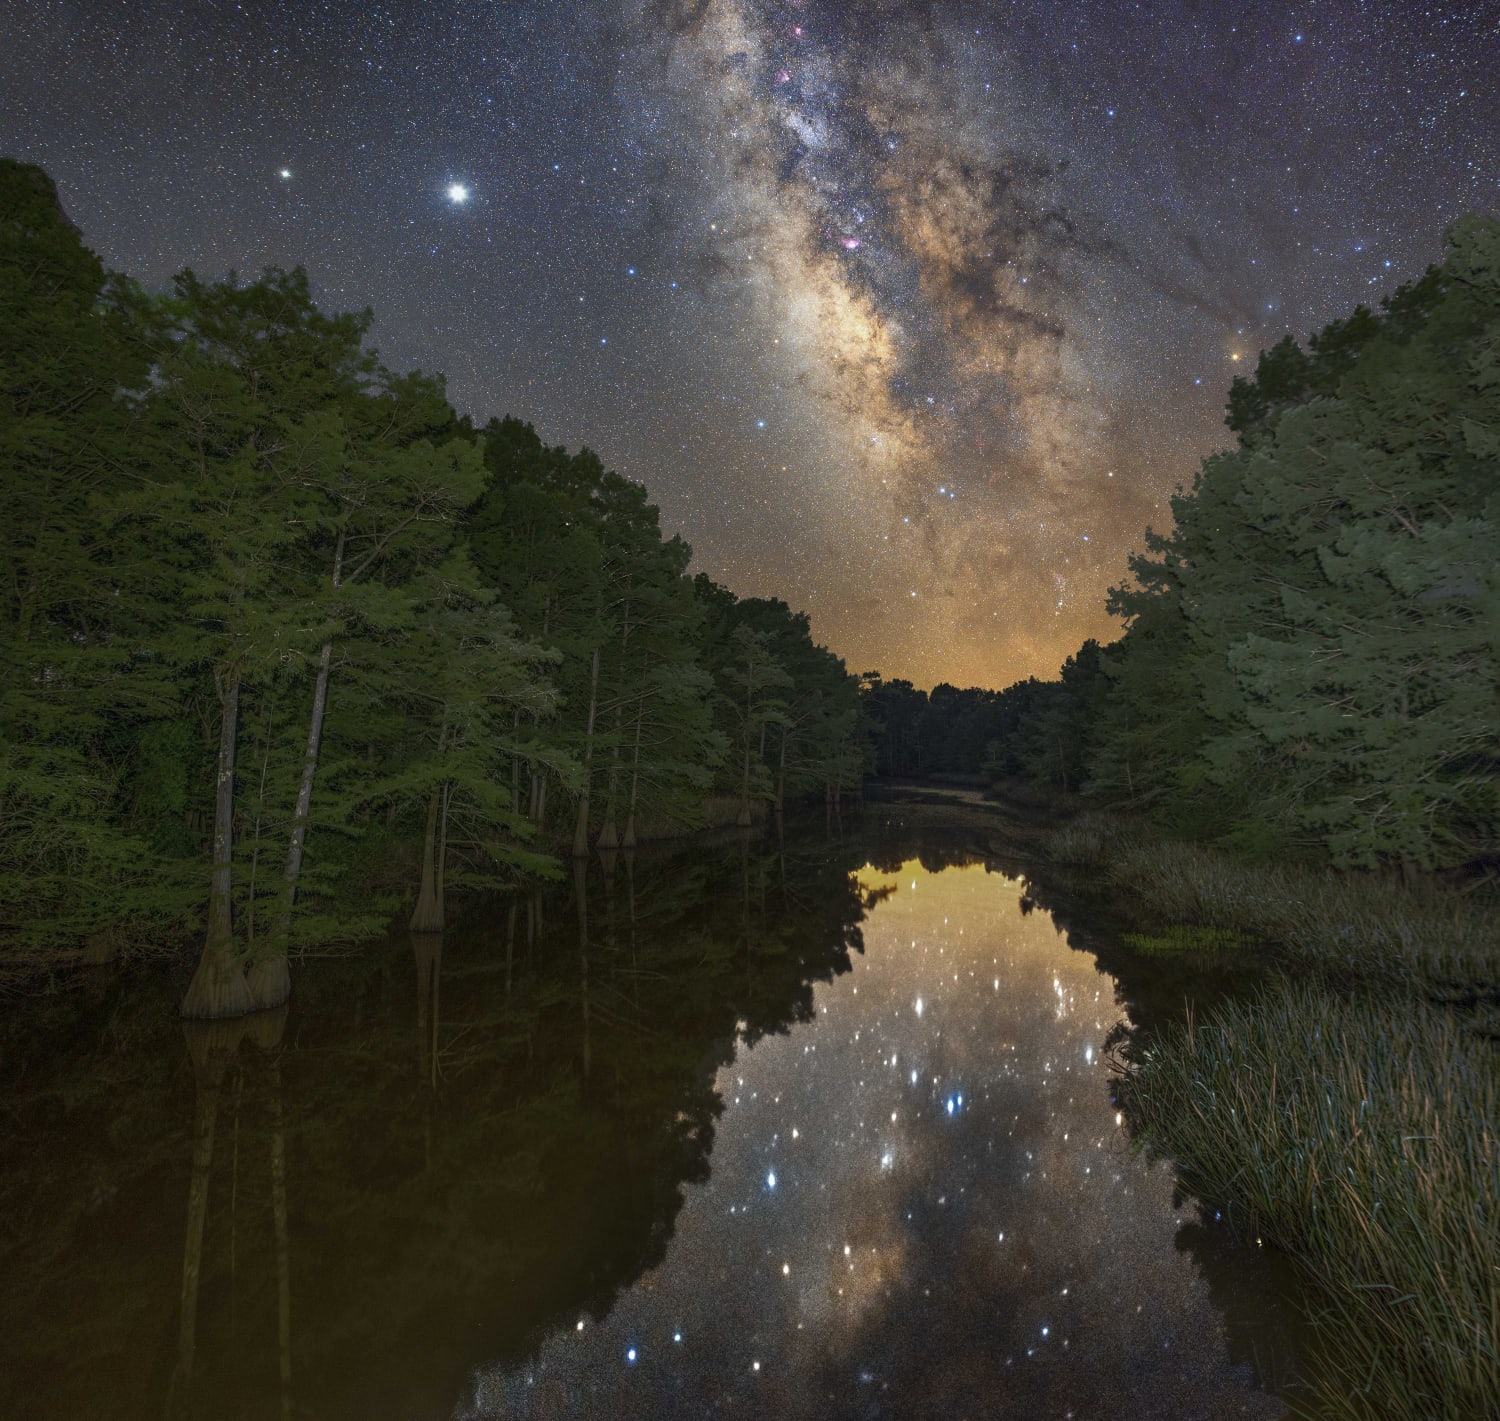 Galactic Bayou - My Favorite Place to Photograph the Milky Way in Natchitoches, Louisiana